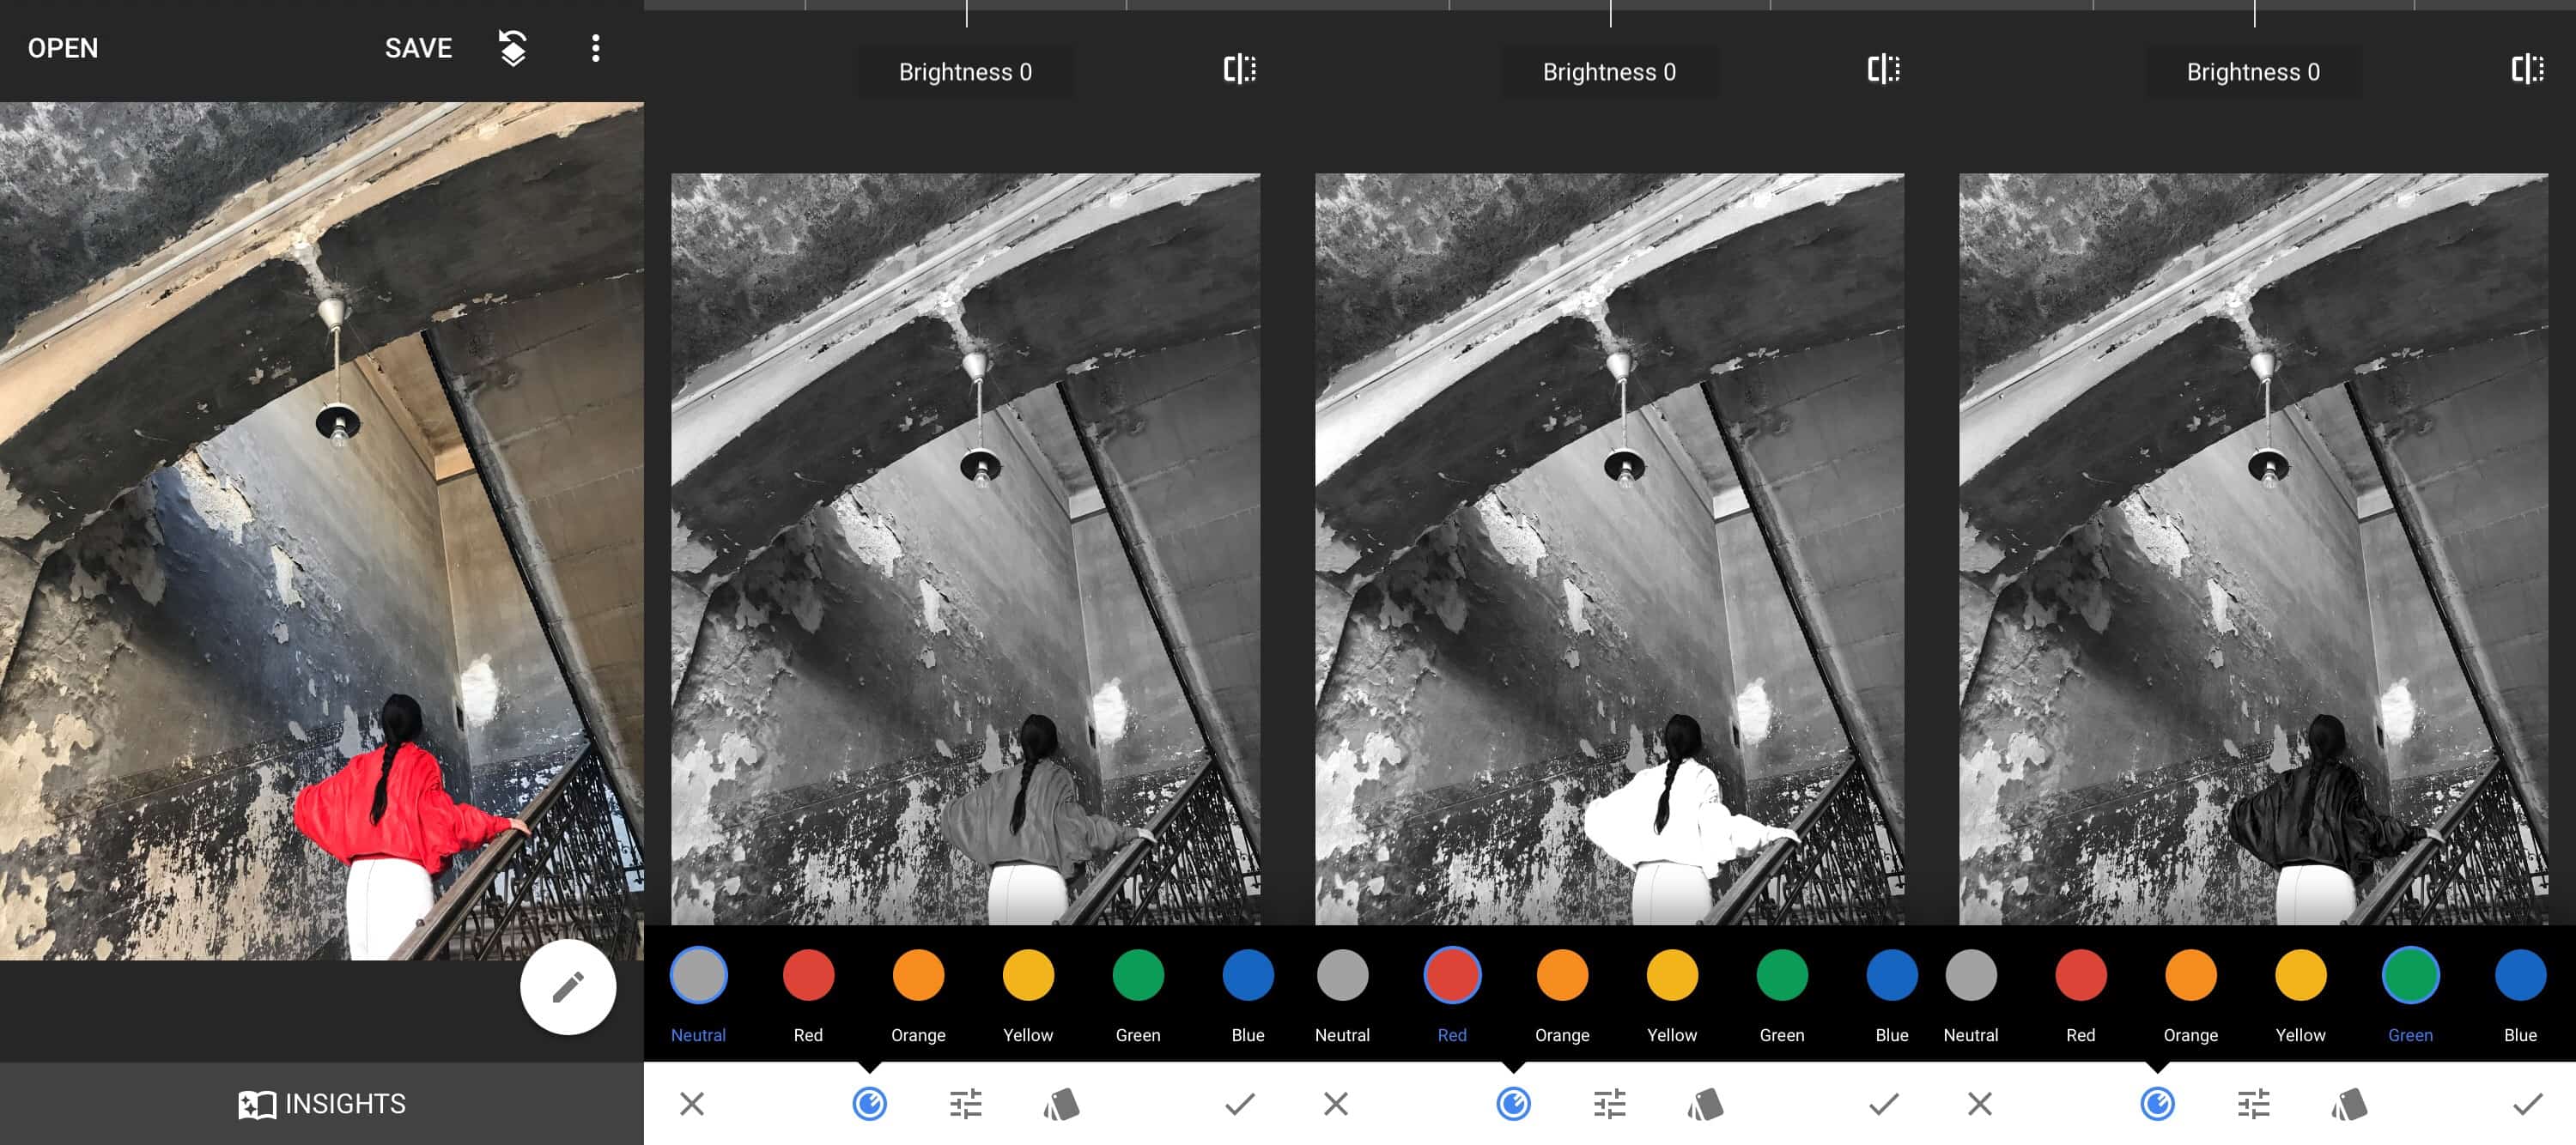 This shows how red and green filters can affect a B&W image.